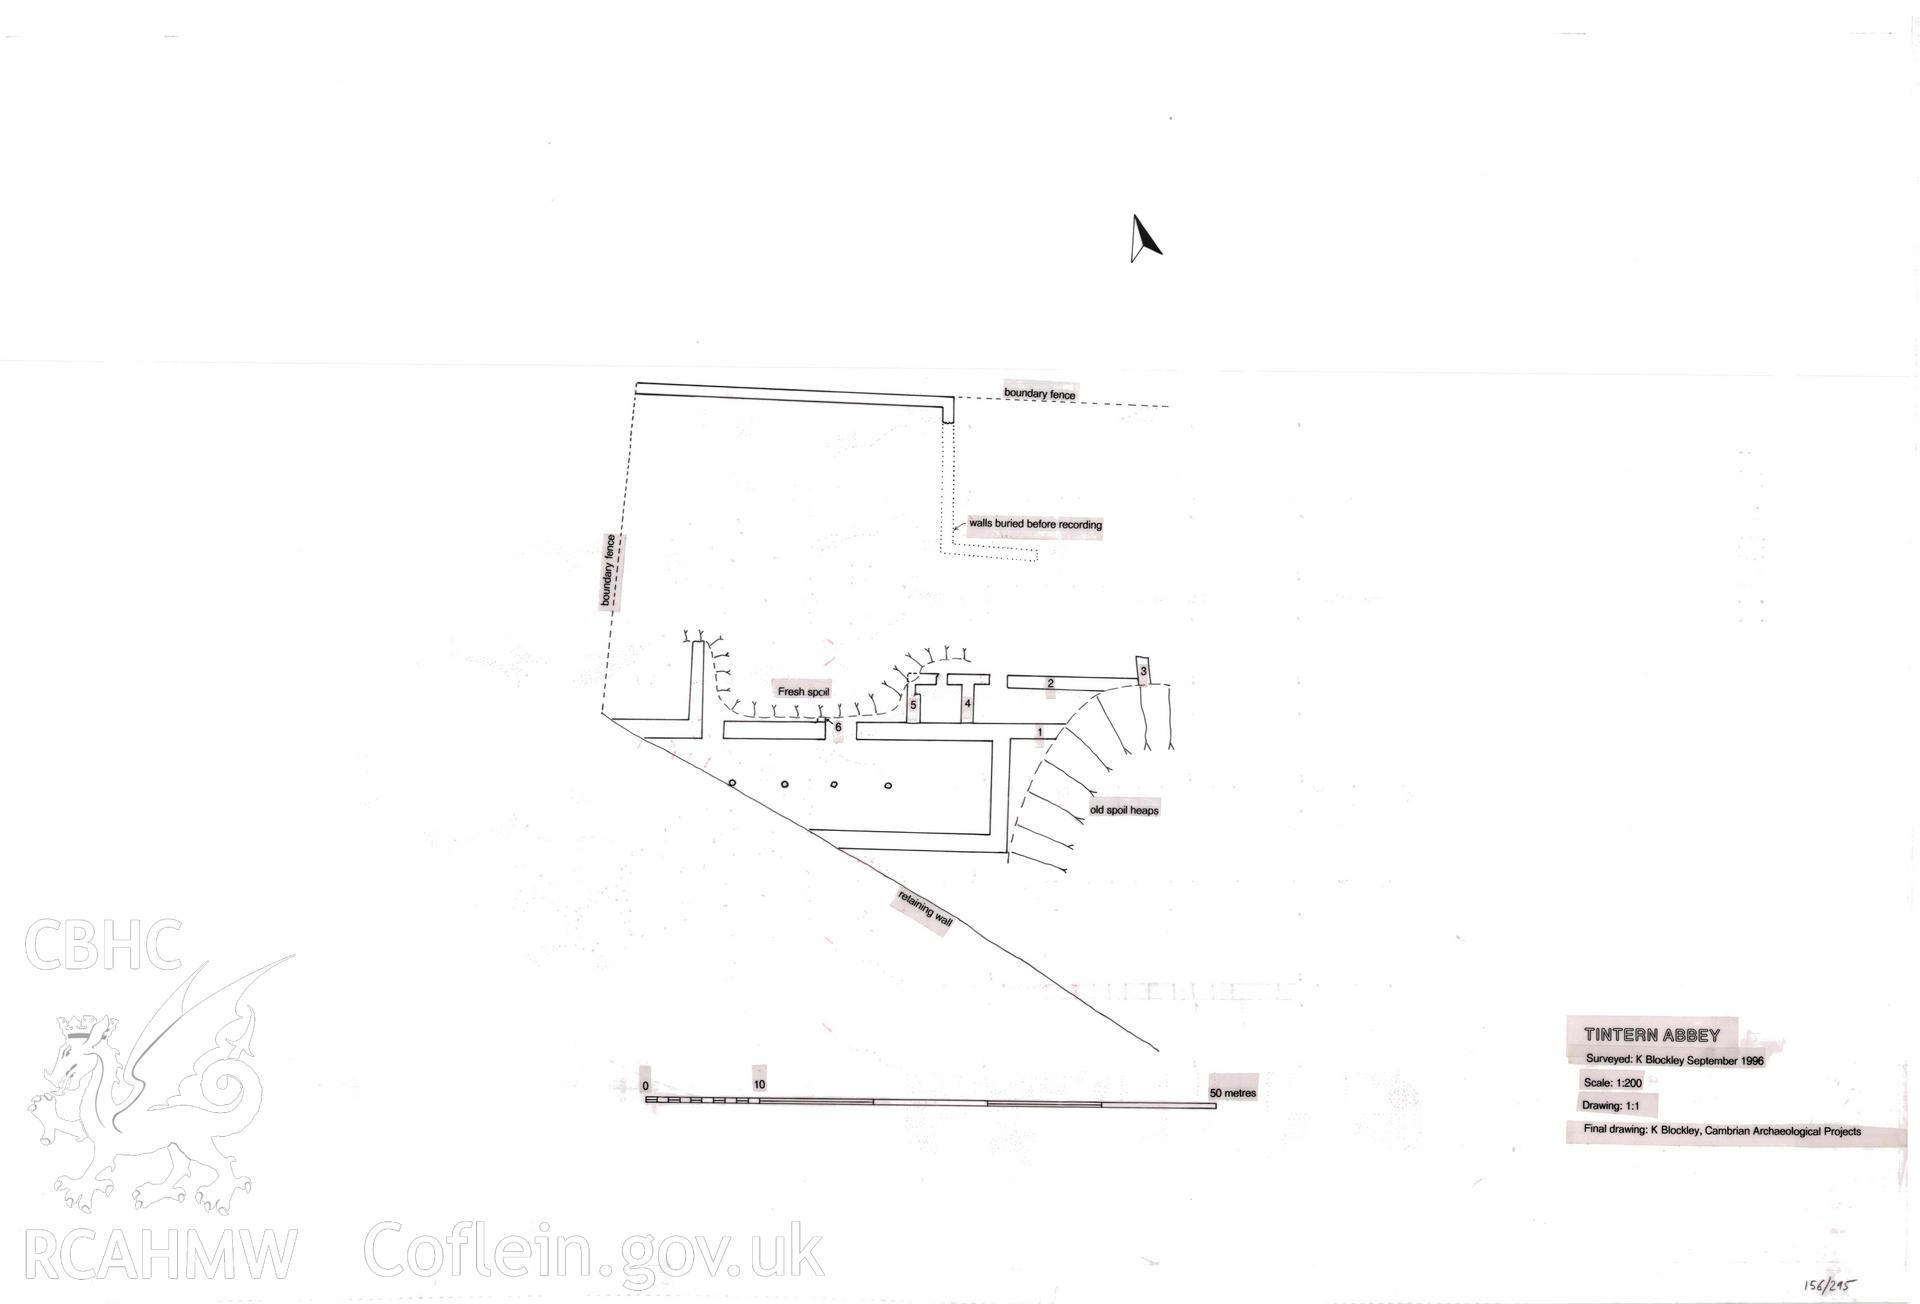 Cadw guardianship monument drawing, survey of part of land, Tintern Abbey. Dated 1996.